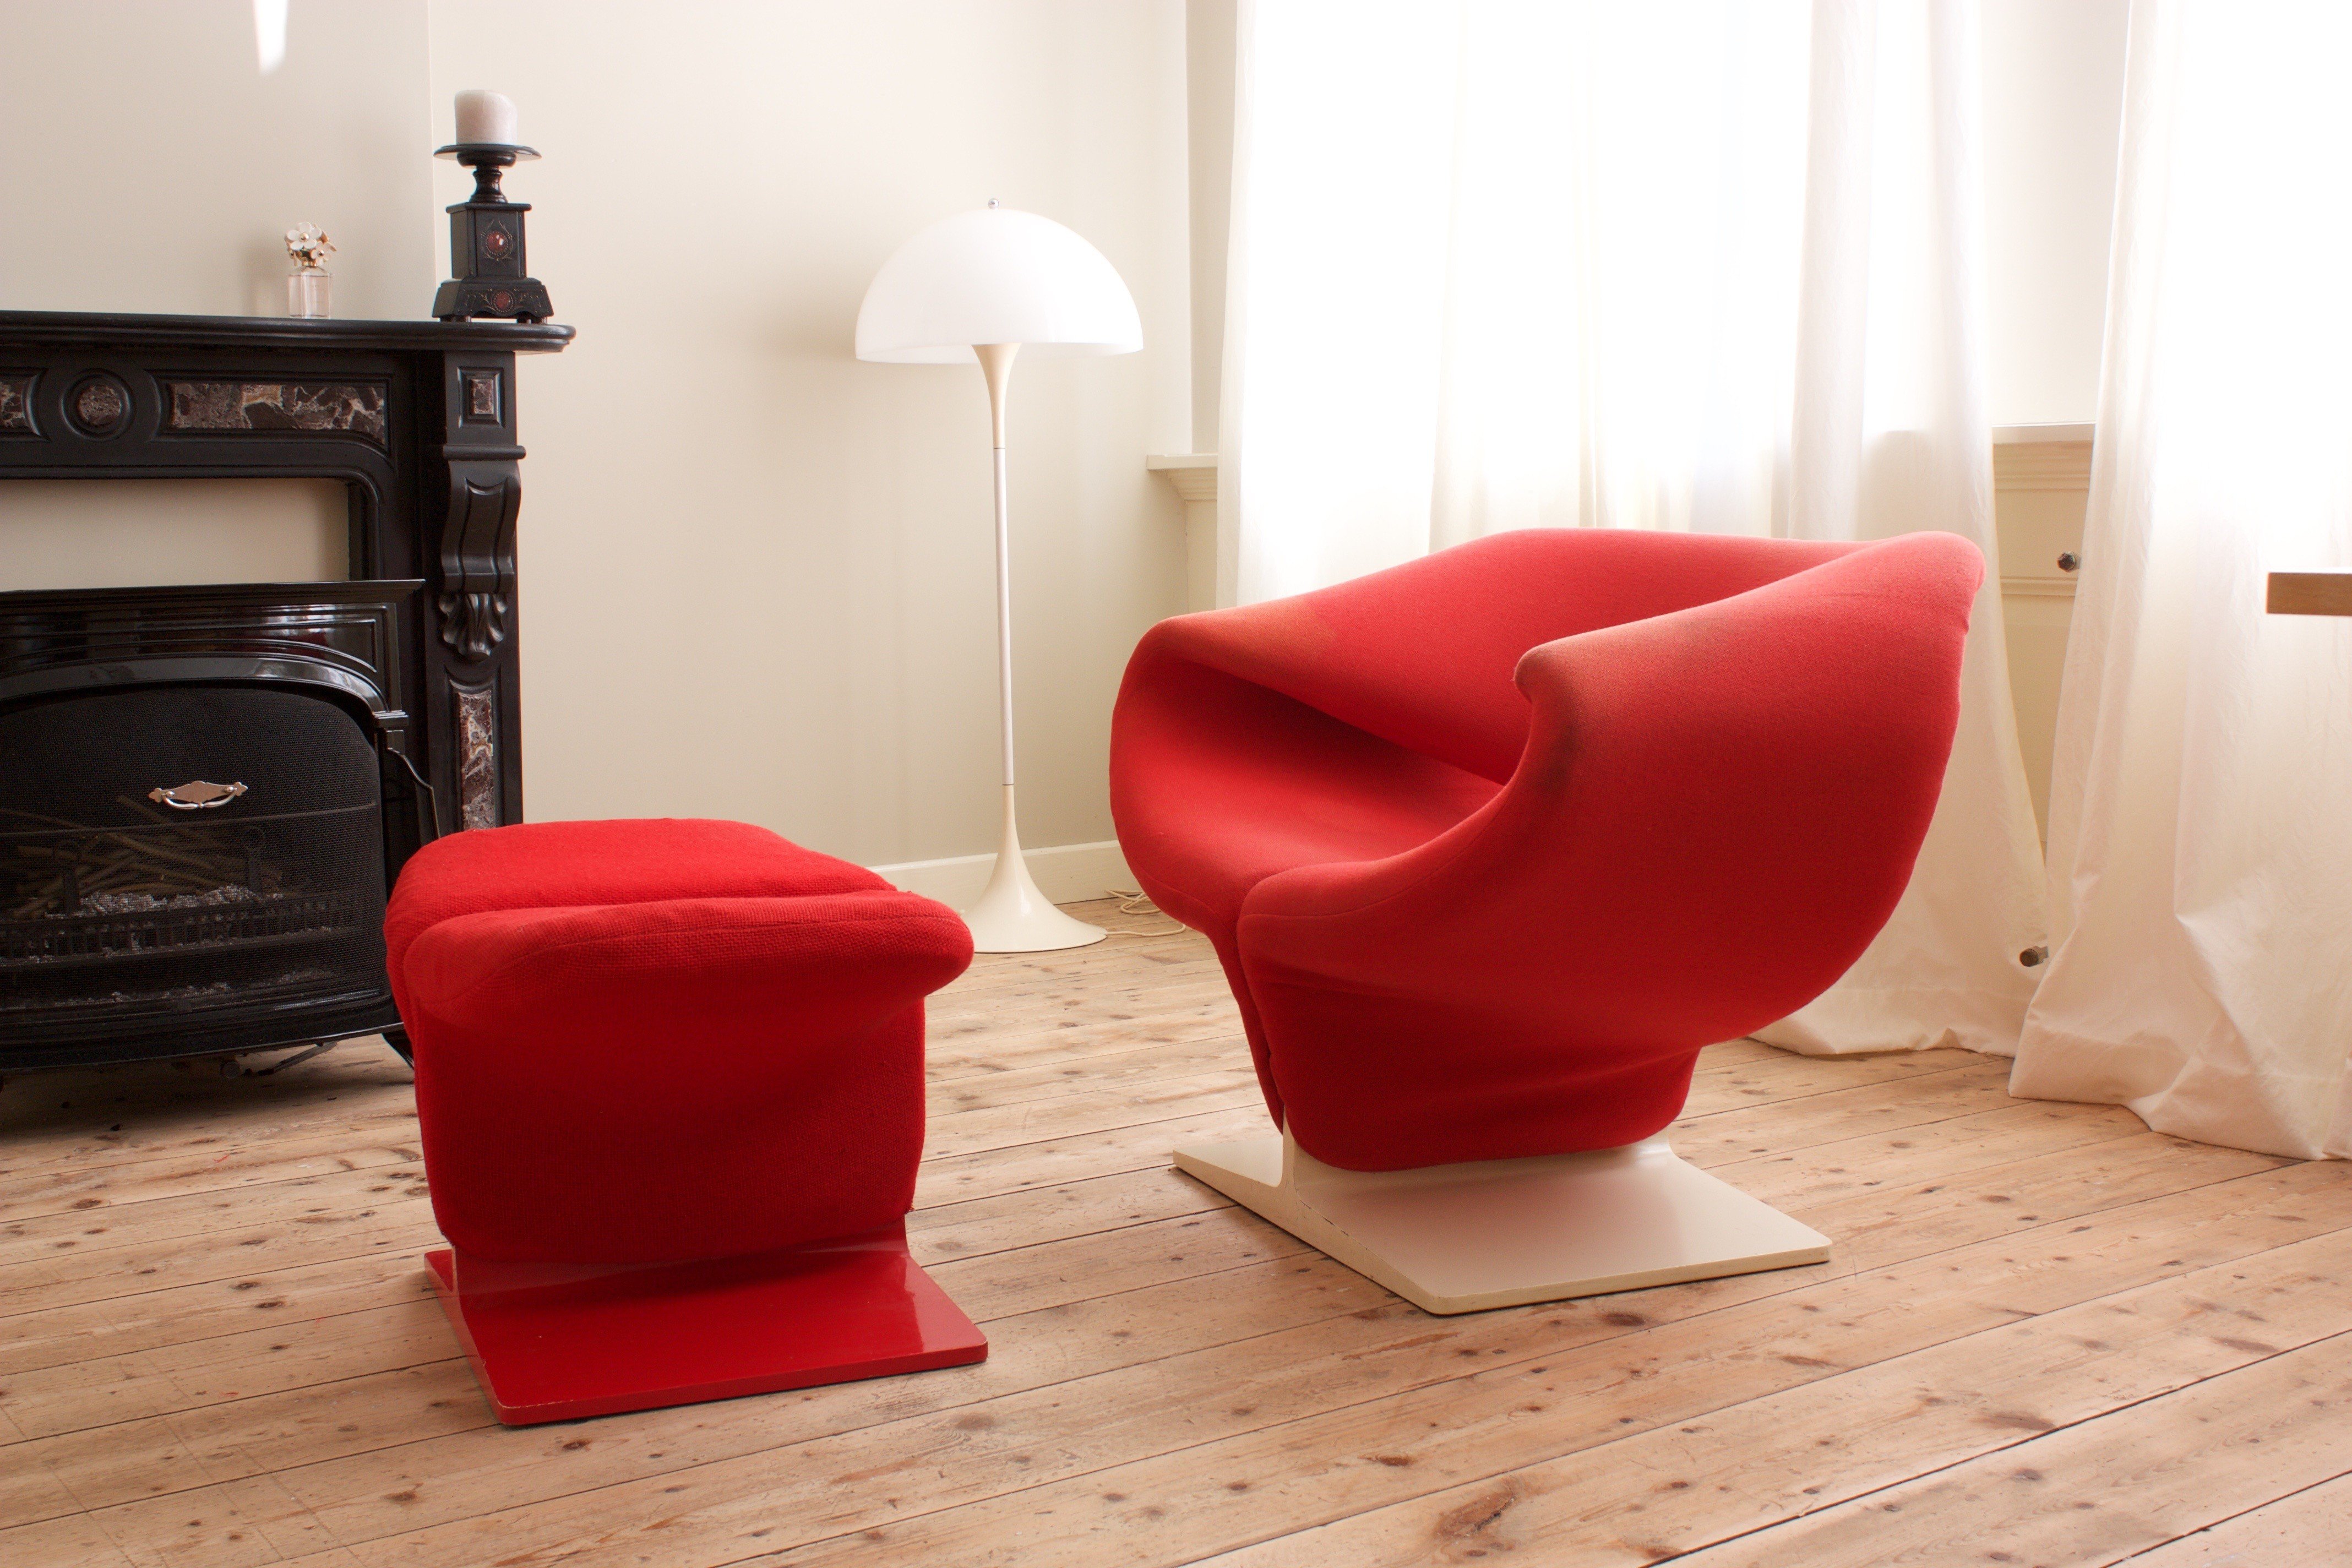 Artifort "Ribbon" chair with ottoman by Pierre PAULIN